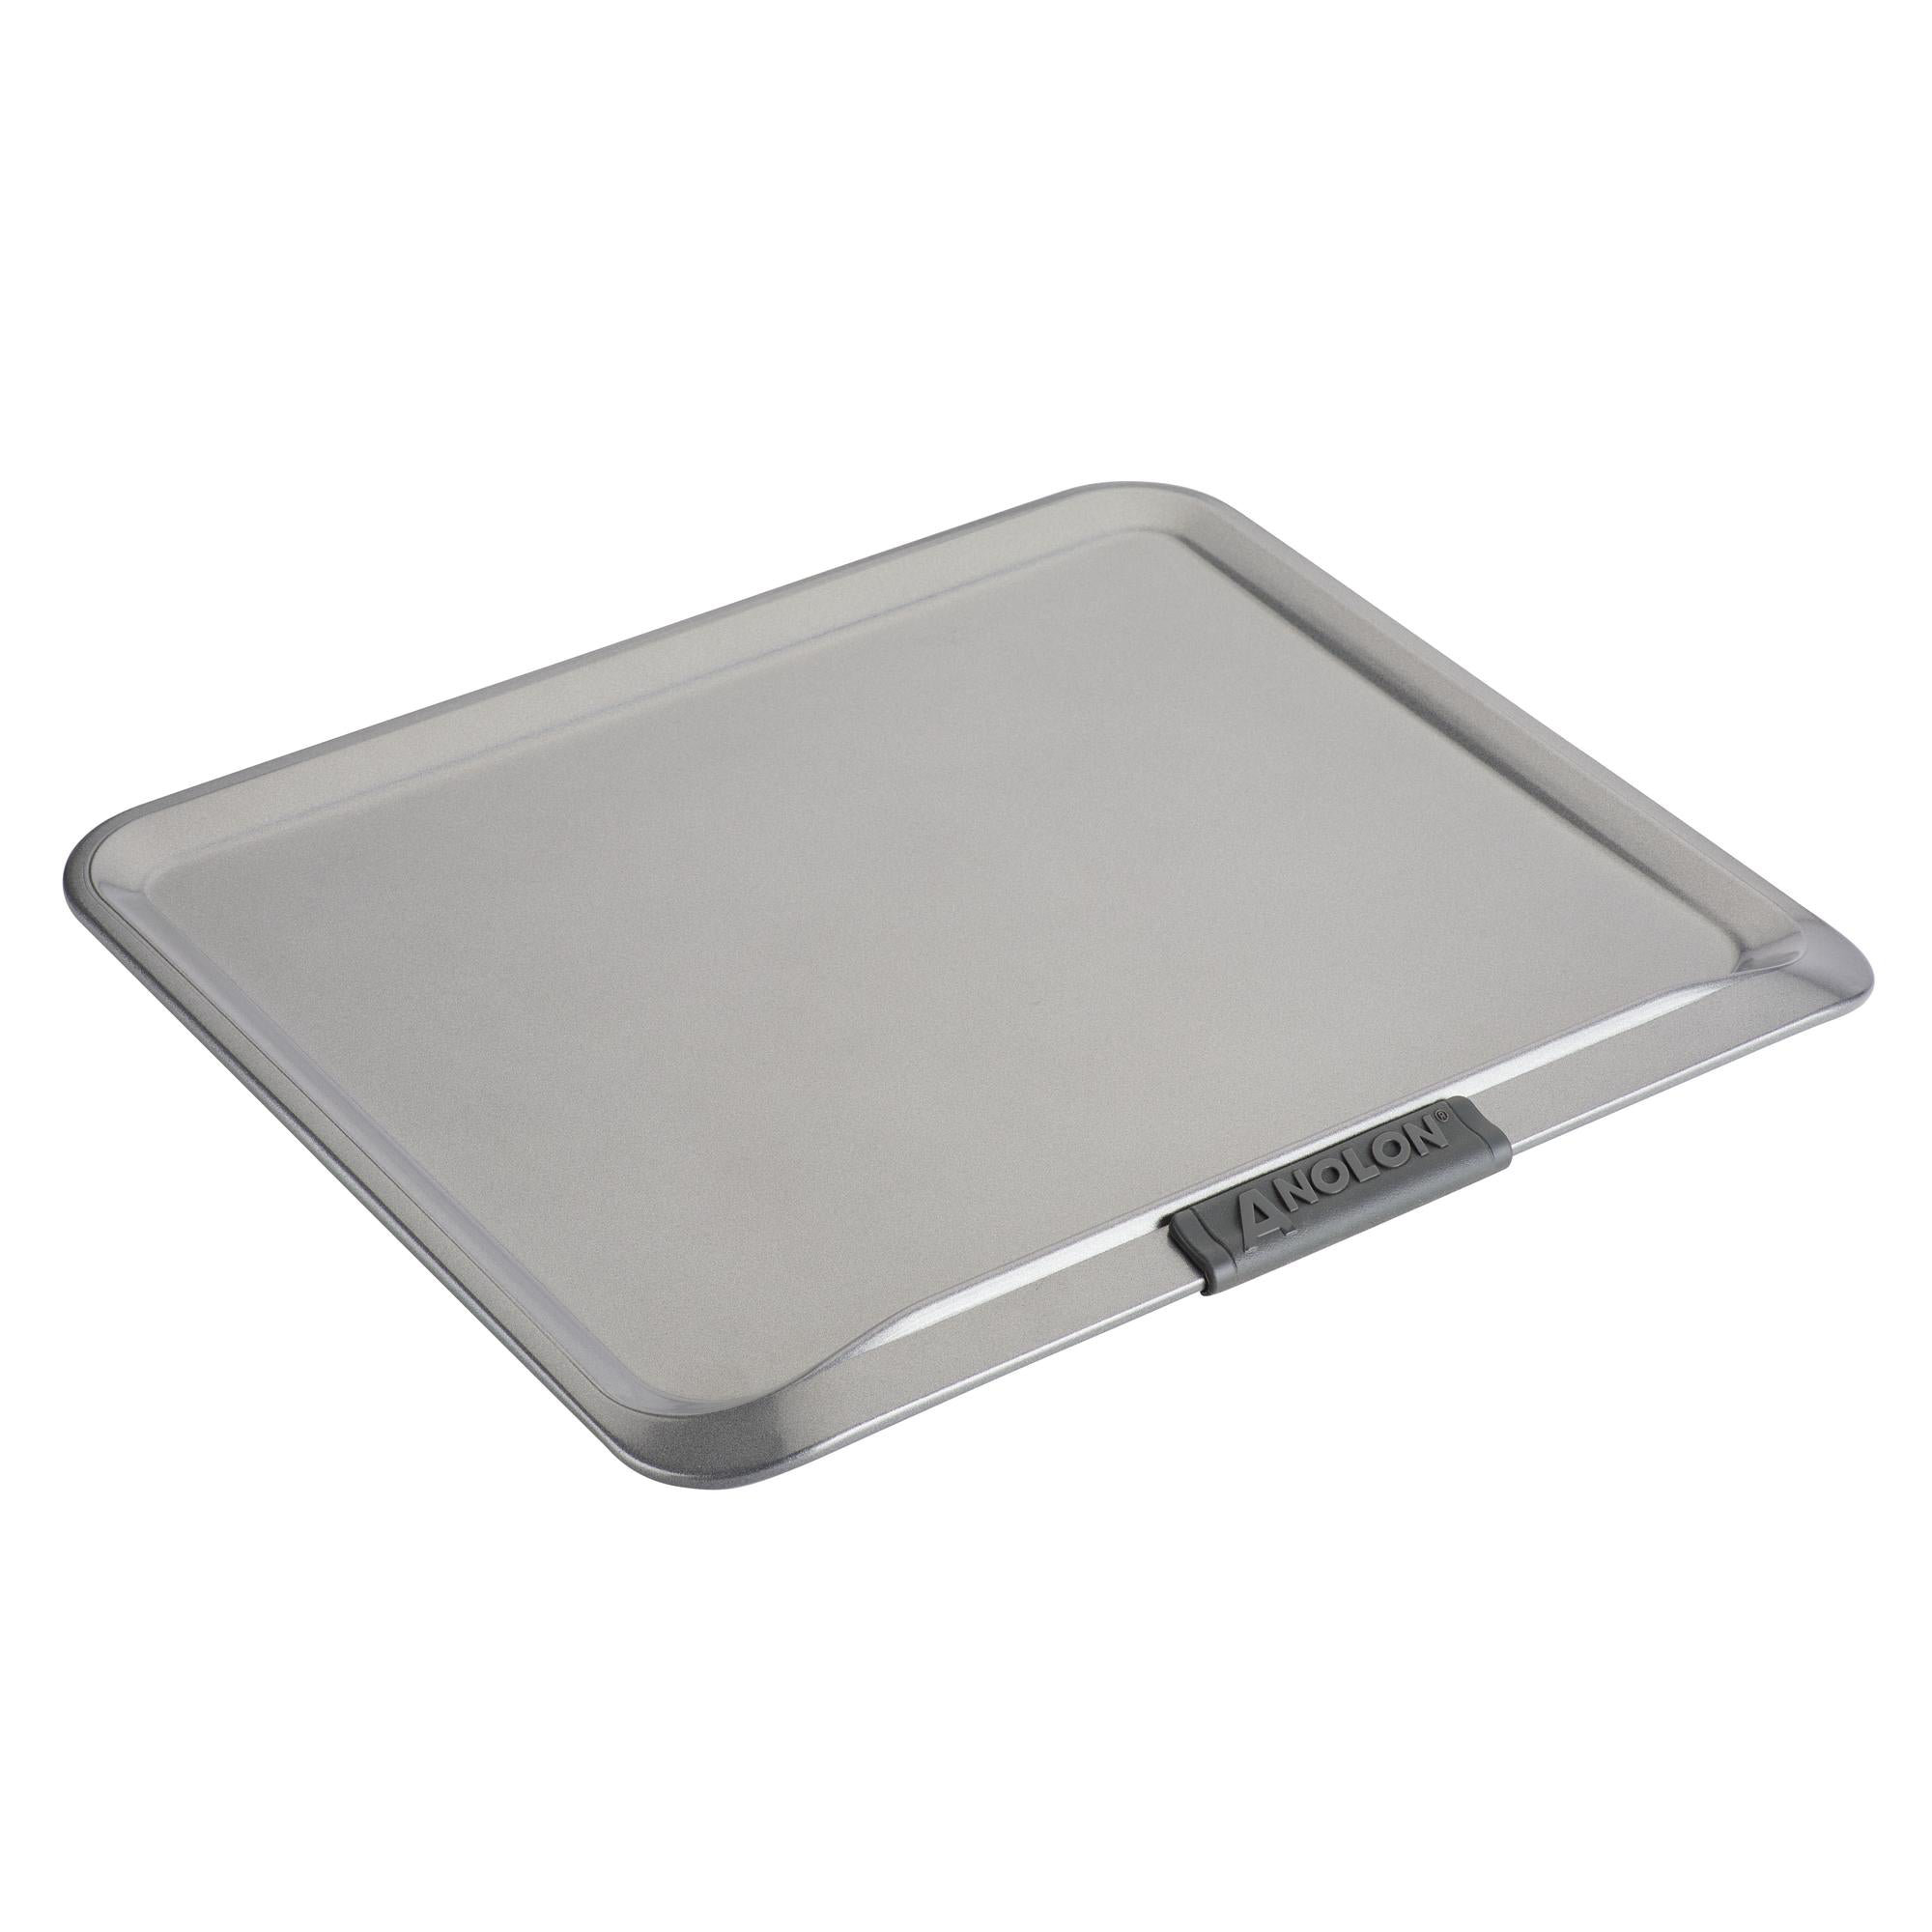 Calphalon Nonstick Bakeware, Cookie Sheet, 14-inch by 17-inch 